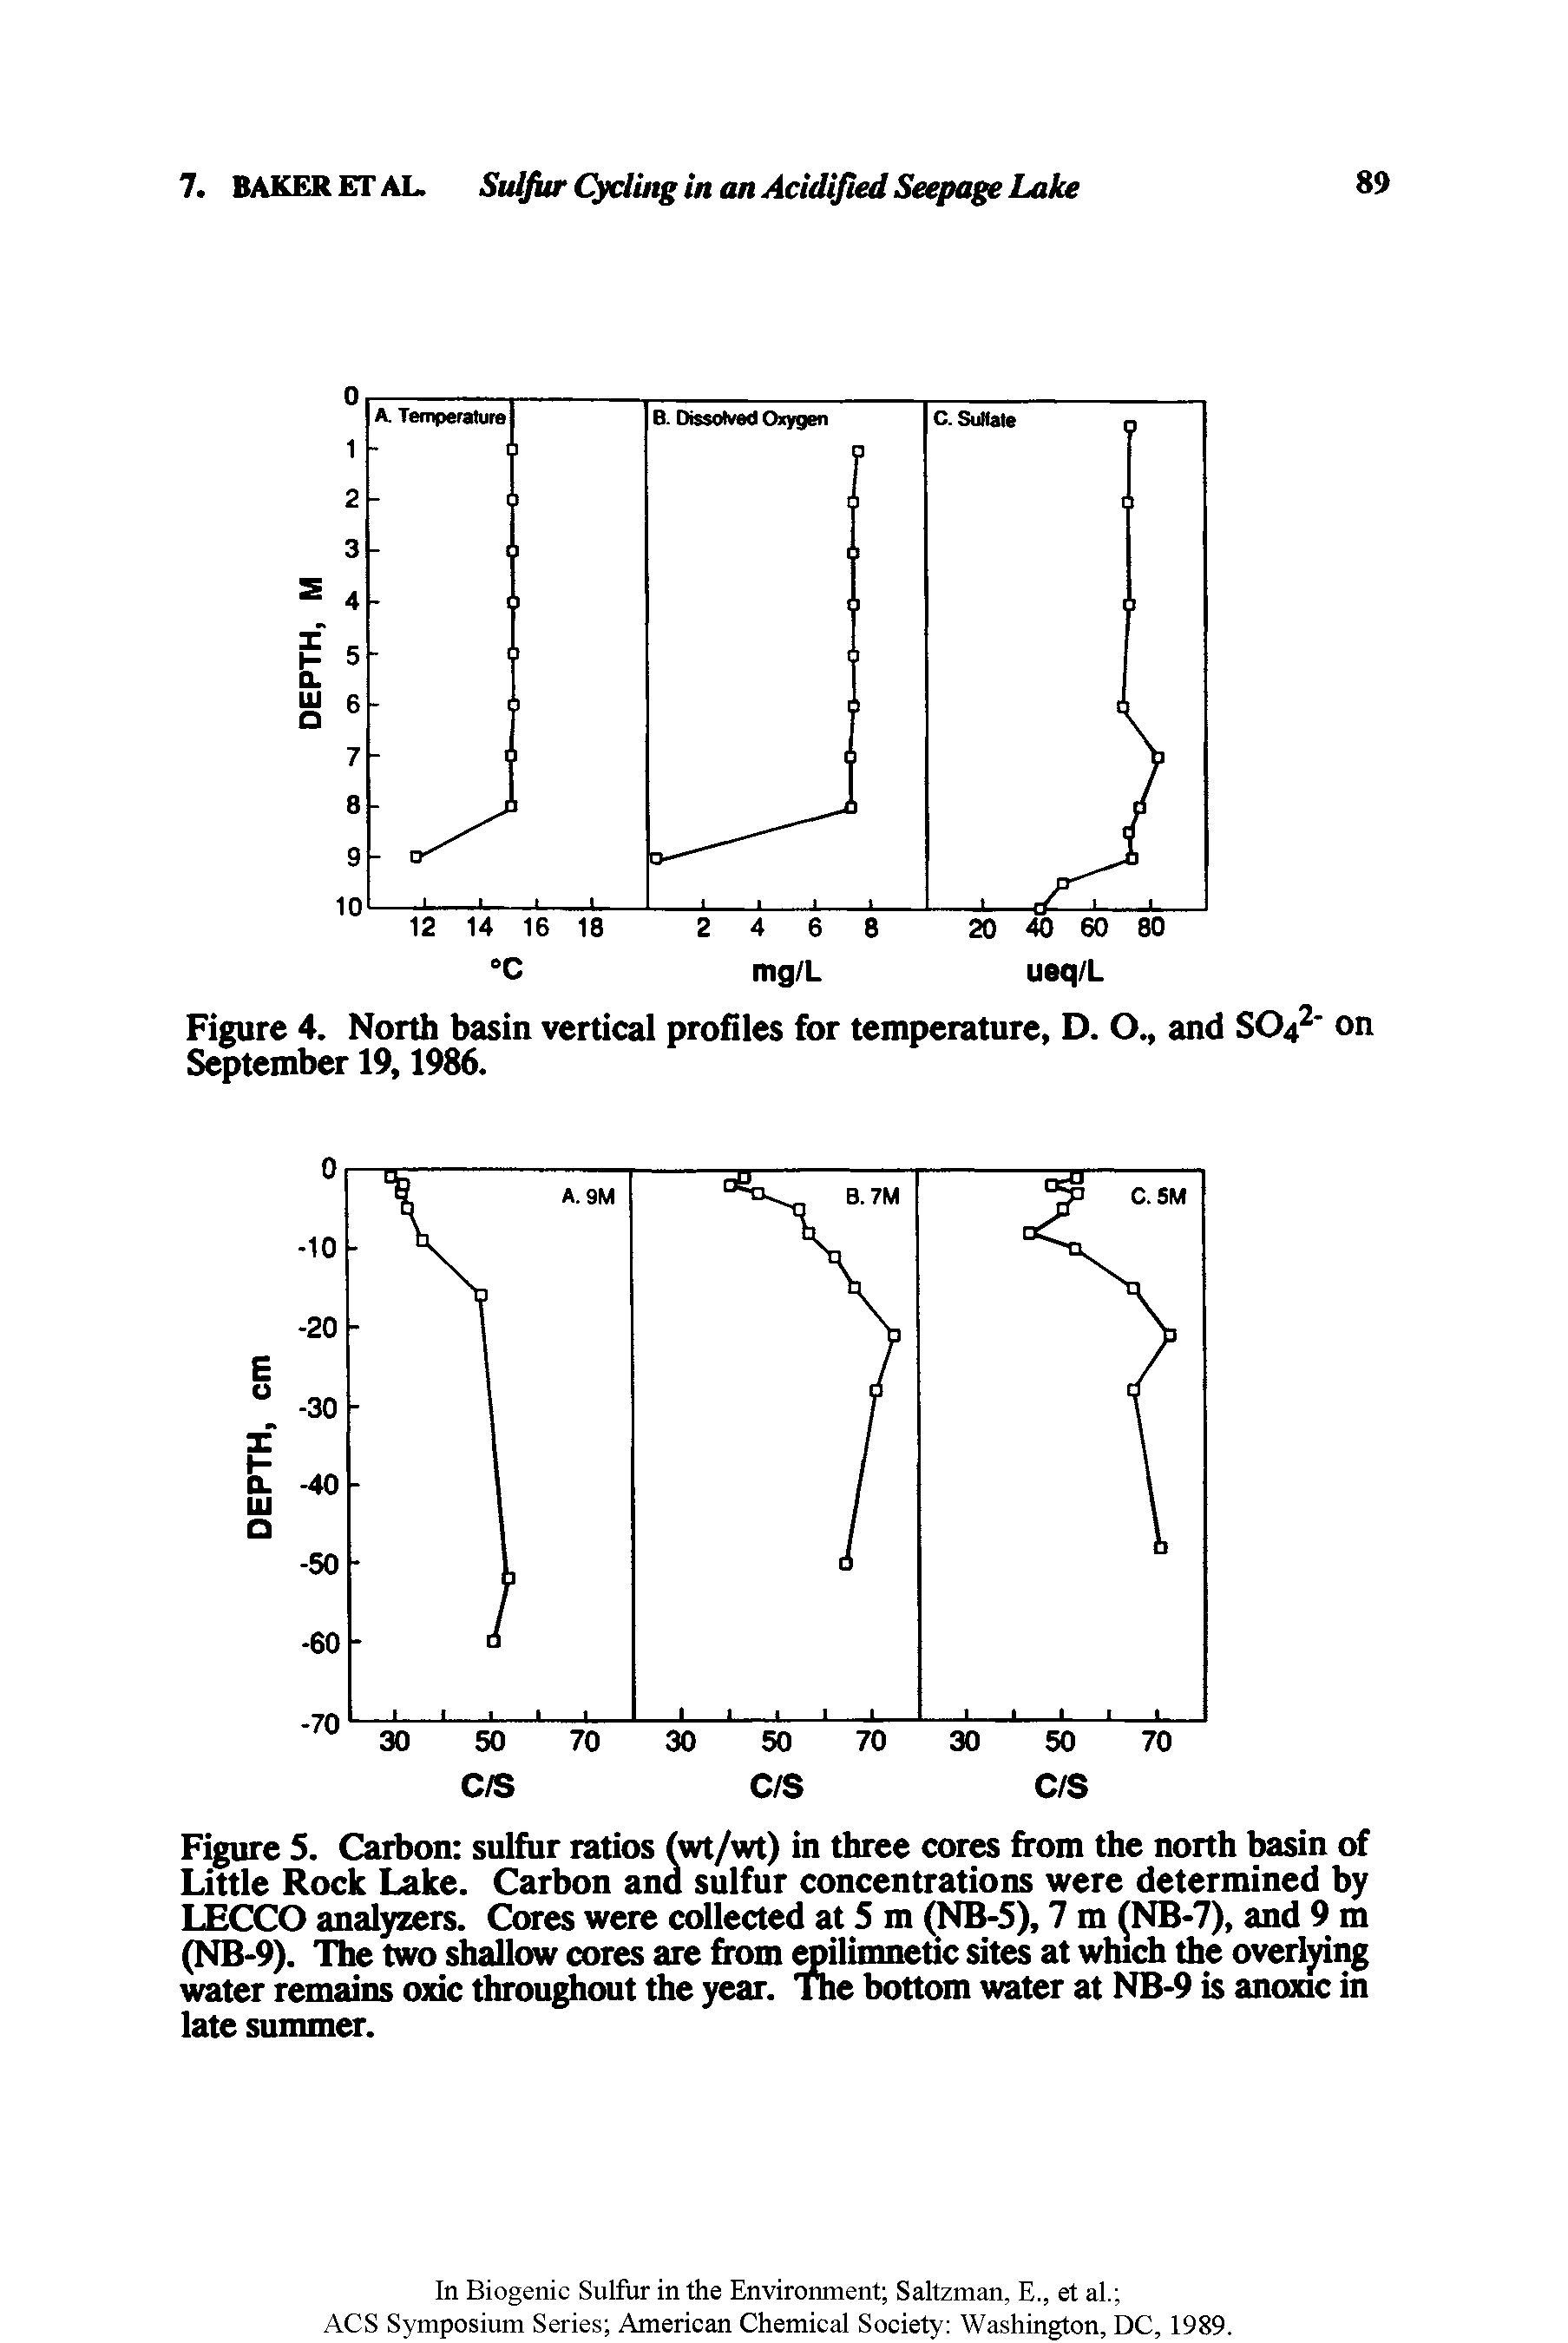 Figure S. Carbon sulfur ratios (wt/wt) in three cores from the north basin of Little Rock Lake. Carbon and sulfur concentrations were determined by LECCO analyzers. Cores were collected at 5 m (NB-5), 7 m (NB-7), and 9 m (NB-9). The two shallow cores are from epilimnetic sites at which the overlying water remains oxic throughout the year. The bottom water at NB-9 is anoxic in late summer.